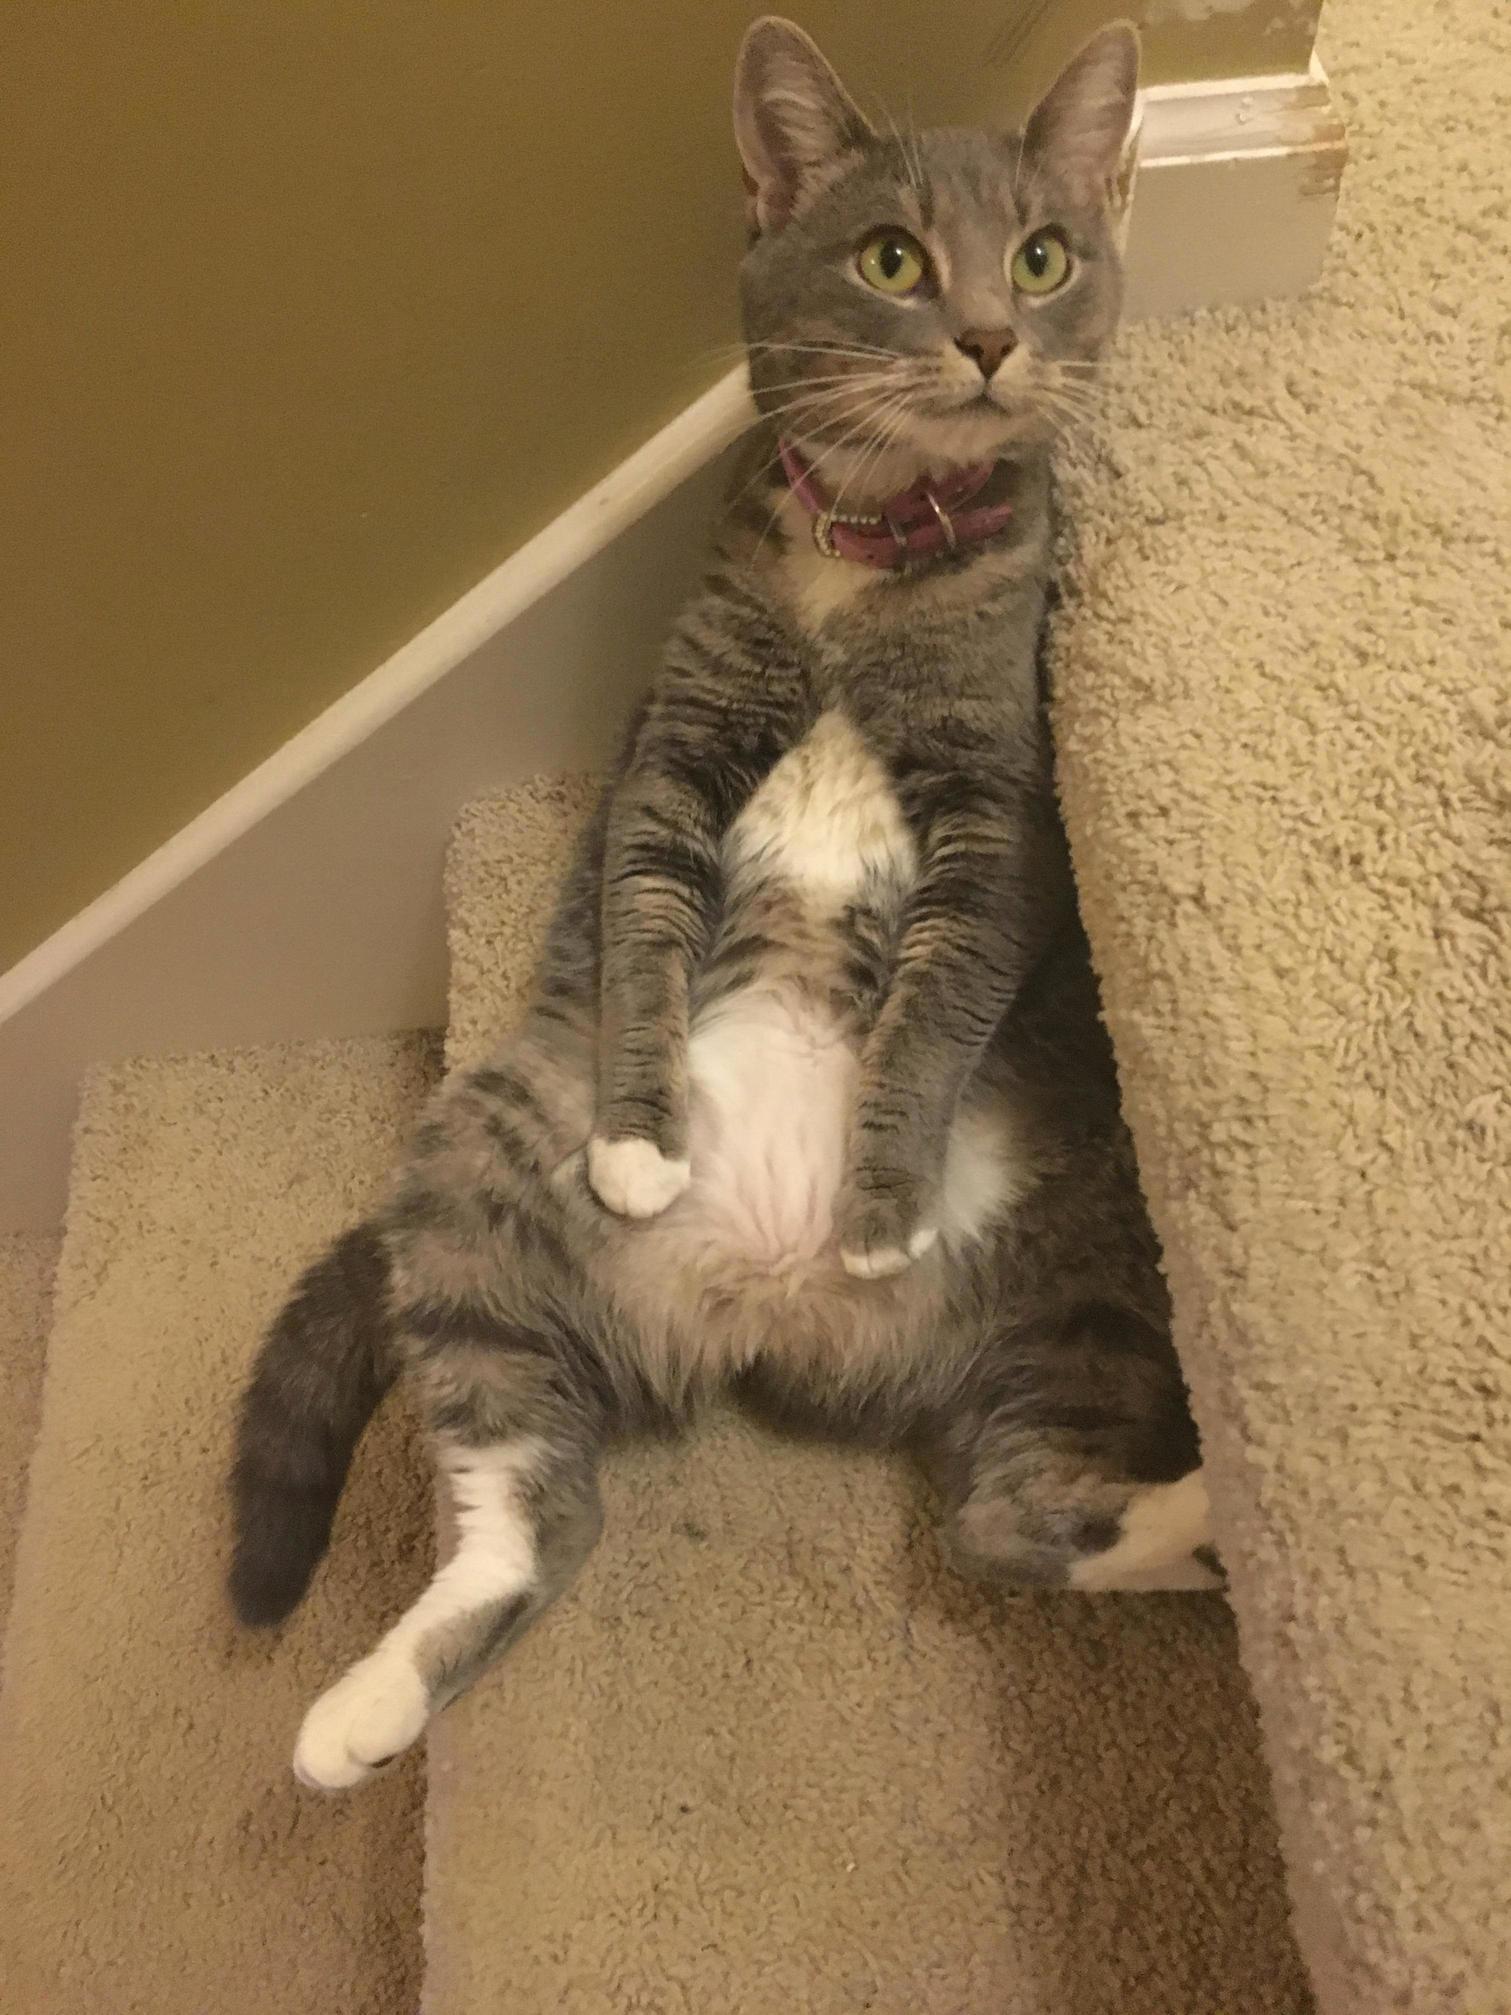 My cat, just hanging out on the stairs.